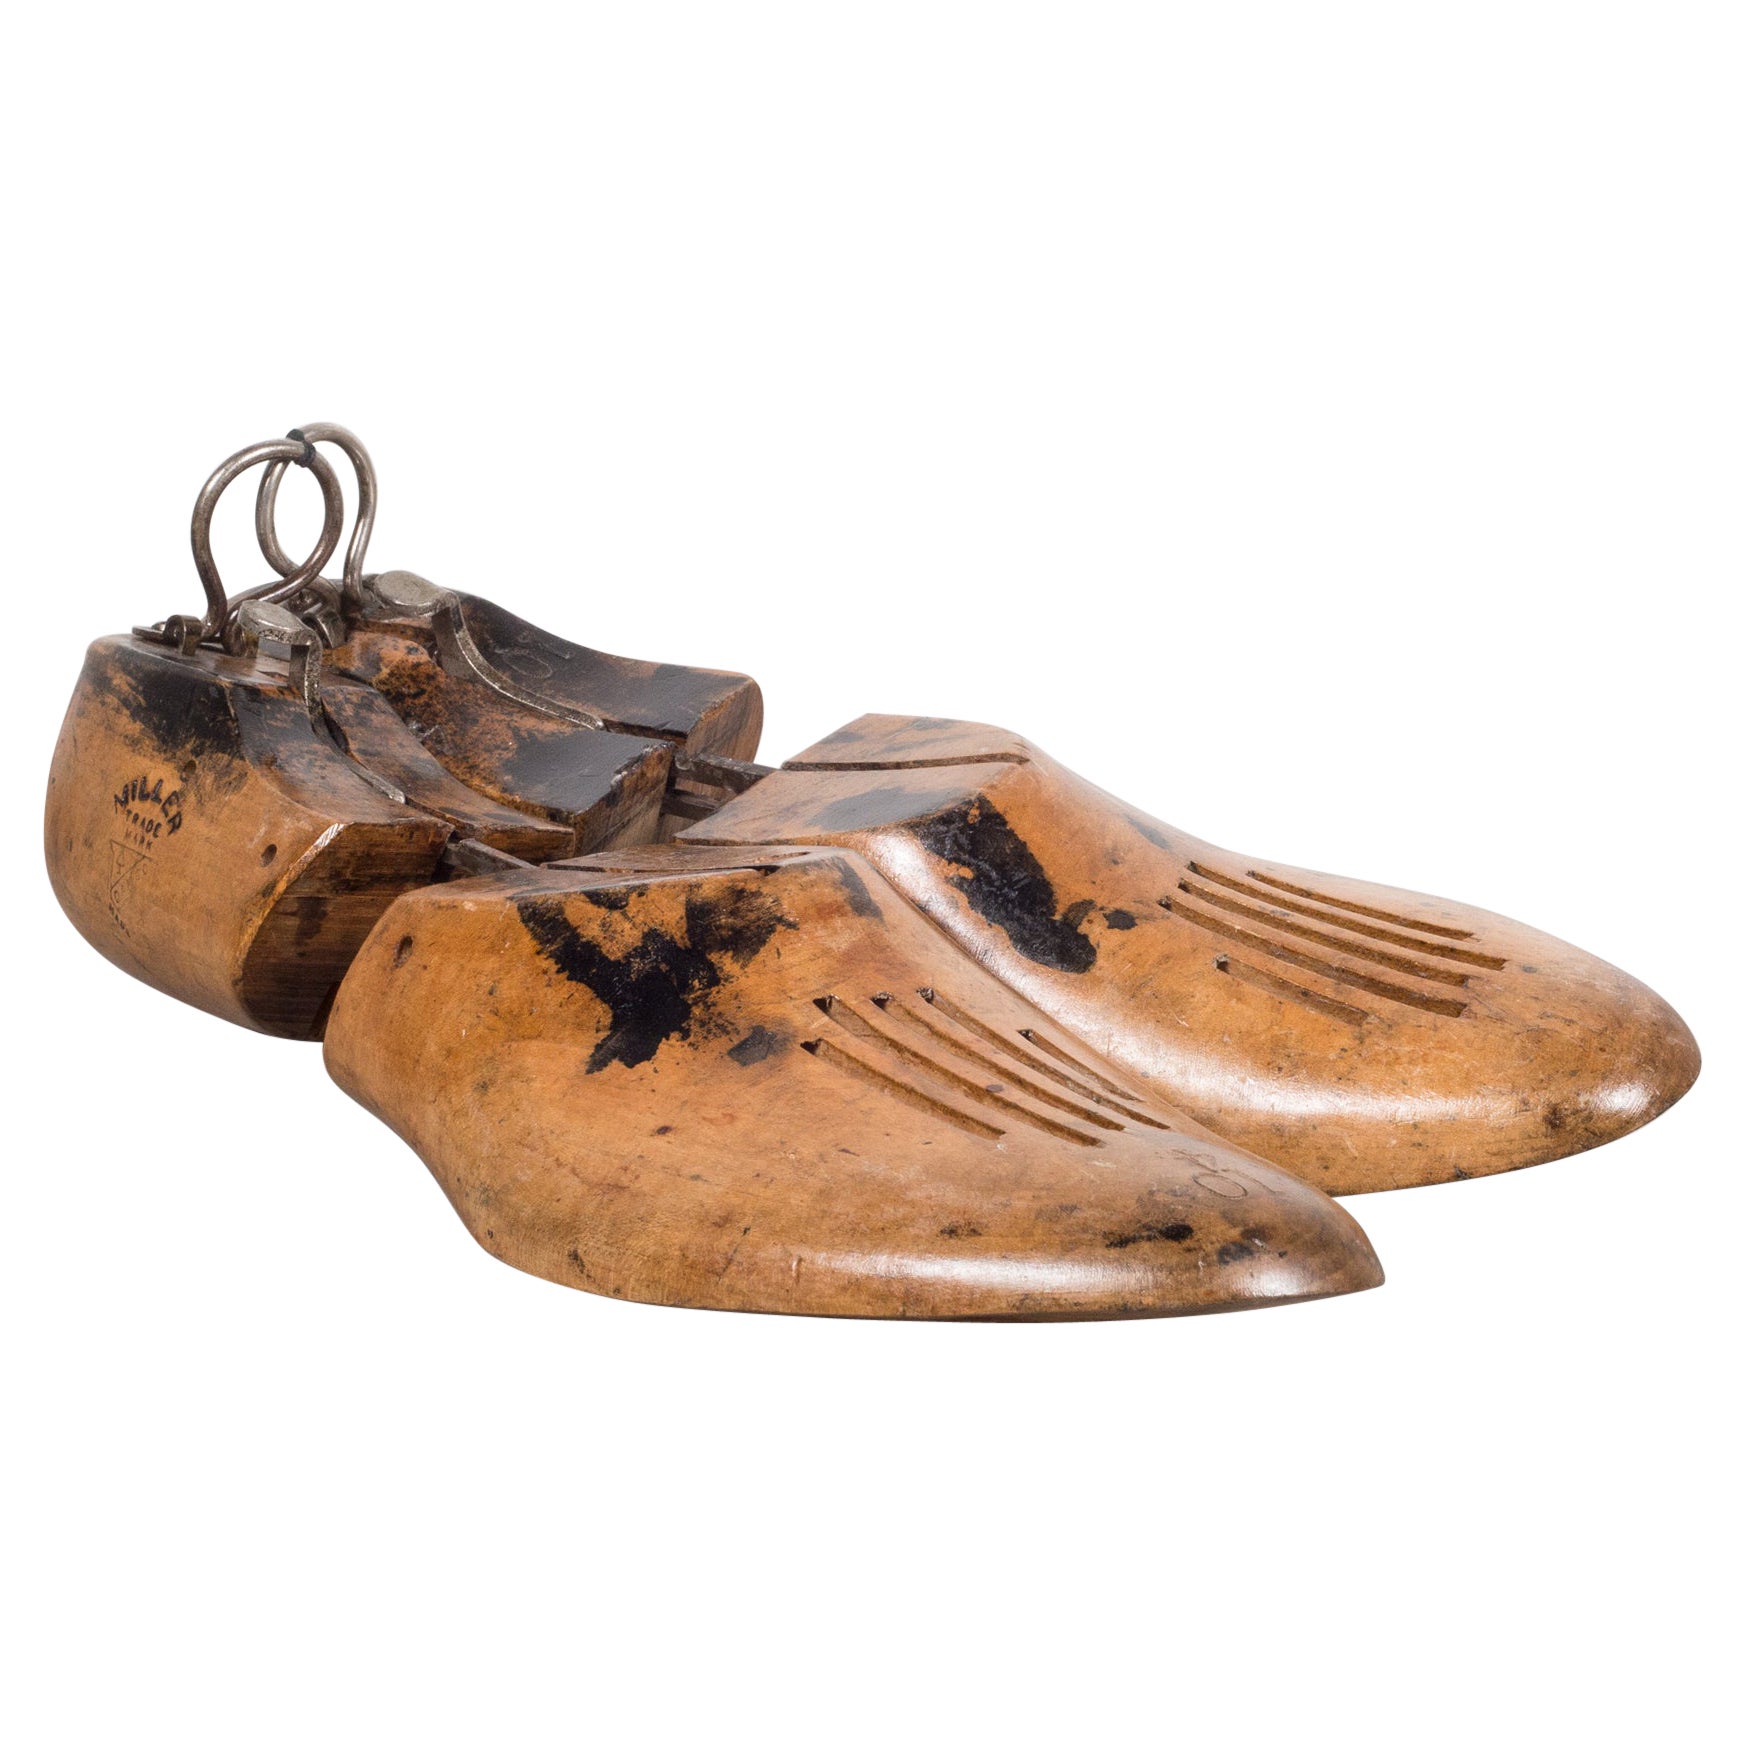 Antique Wooden Shoe Forms with Metal Handles, c.1920 For Sale